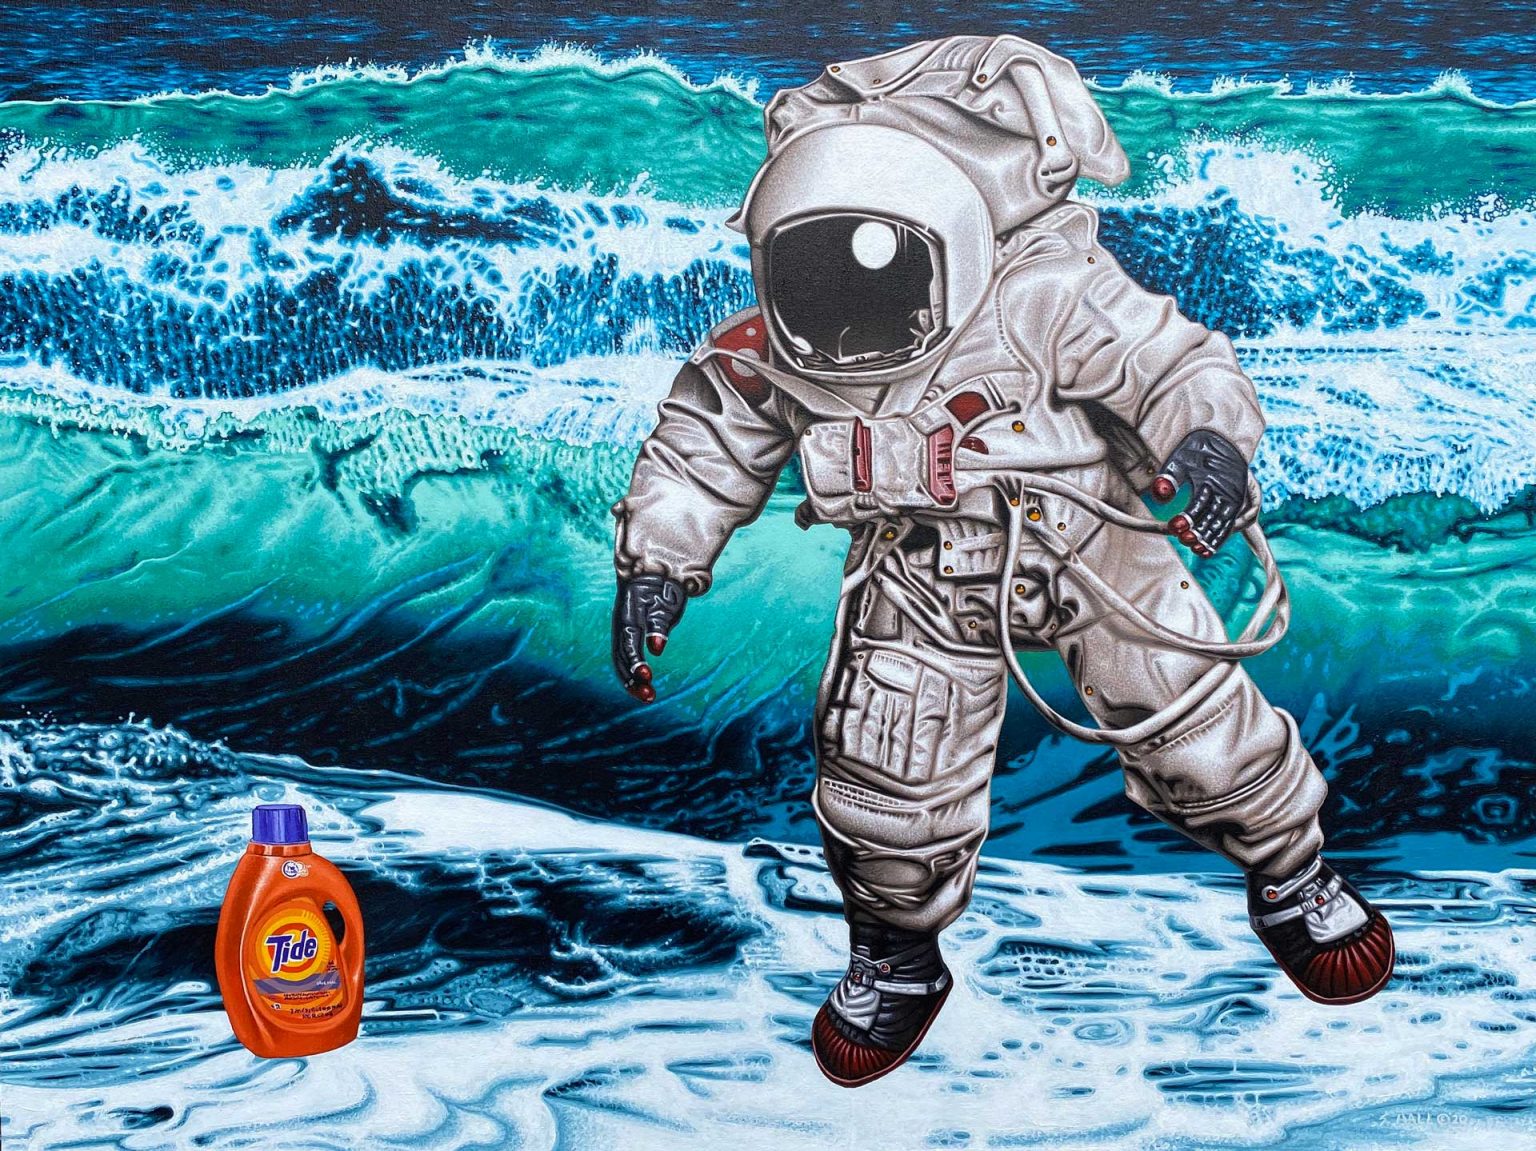 An astronaut floats over green and blue ocean waves. In the bottom left corner is a bottle of Tide detergent.